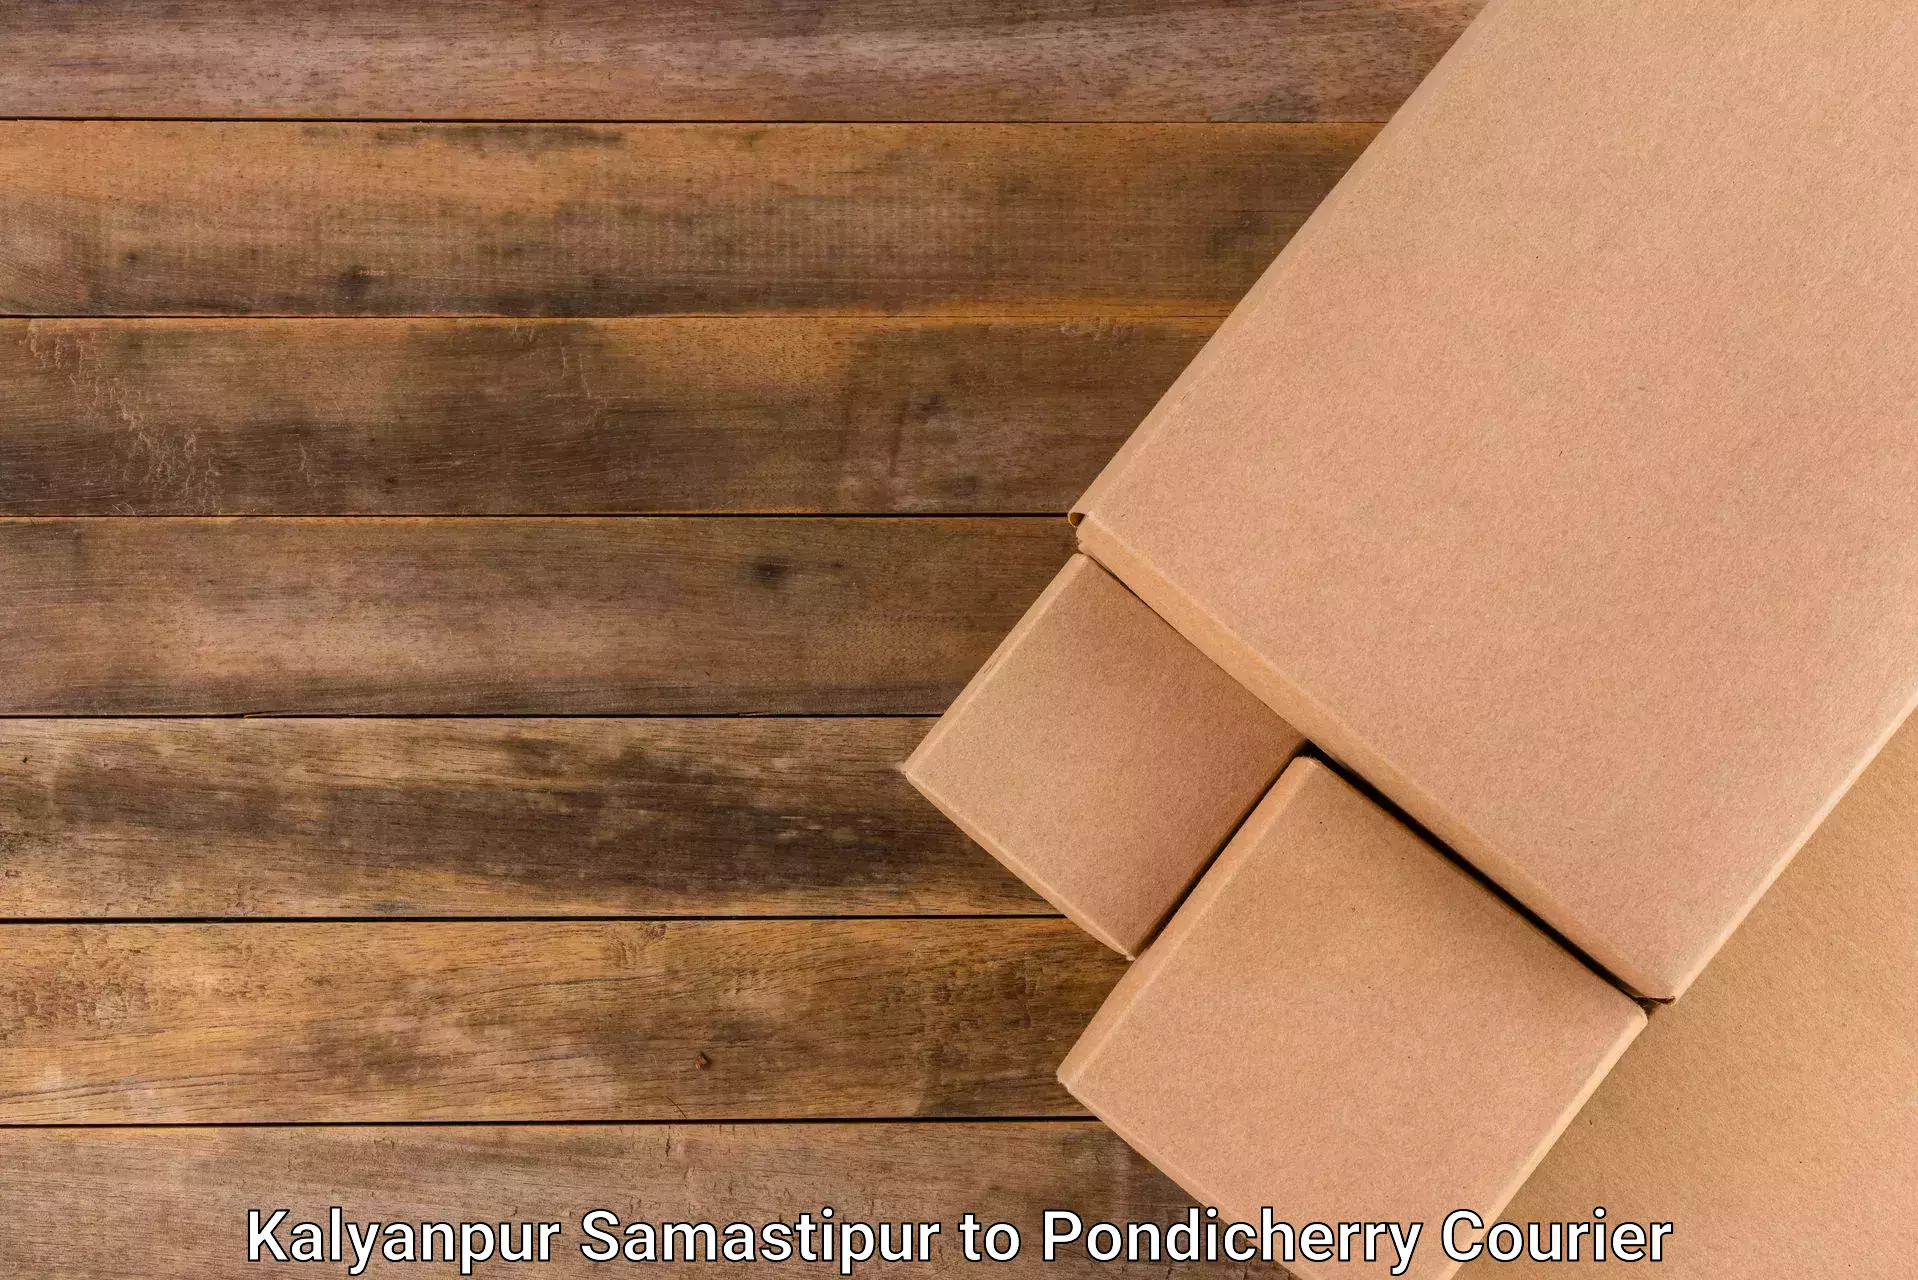 Business courier solutions in Kalyanpur Samastipur to Pondicherry